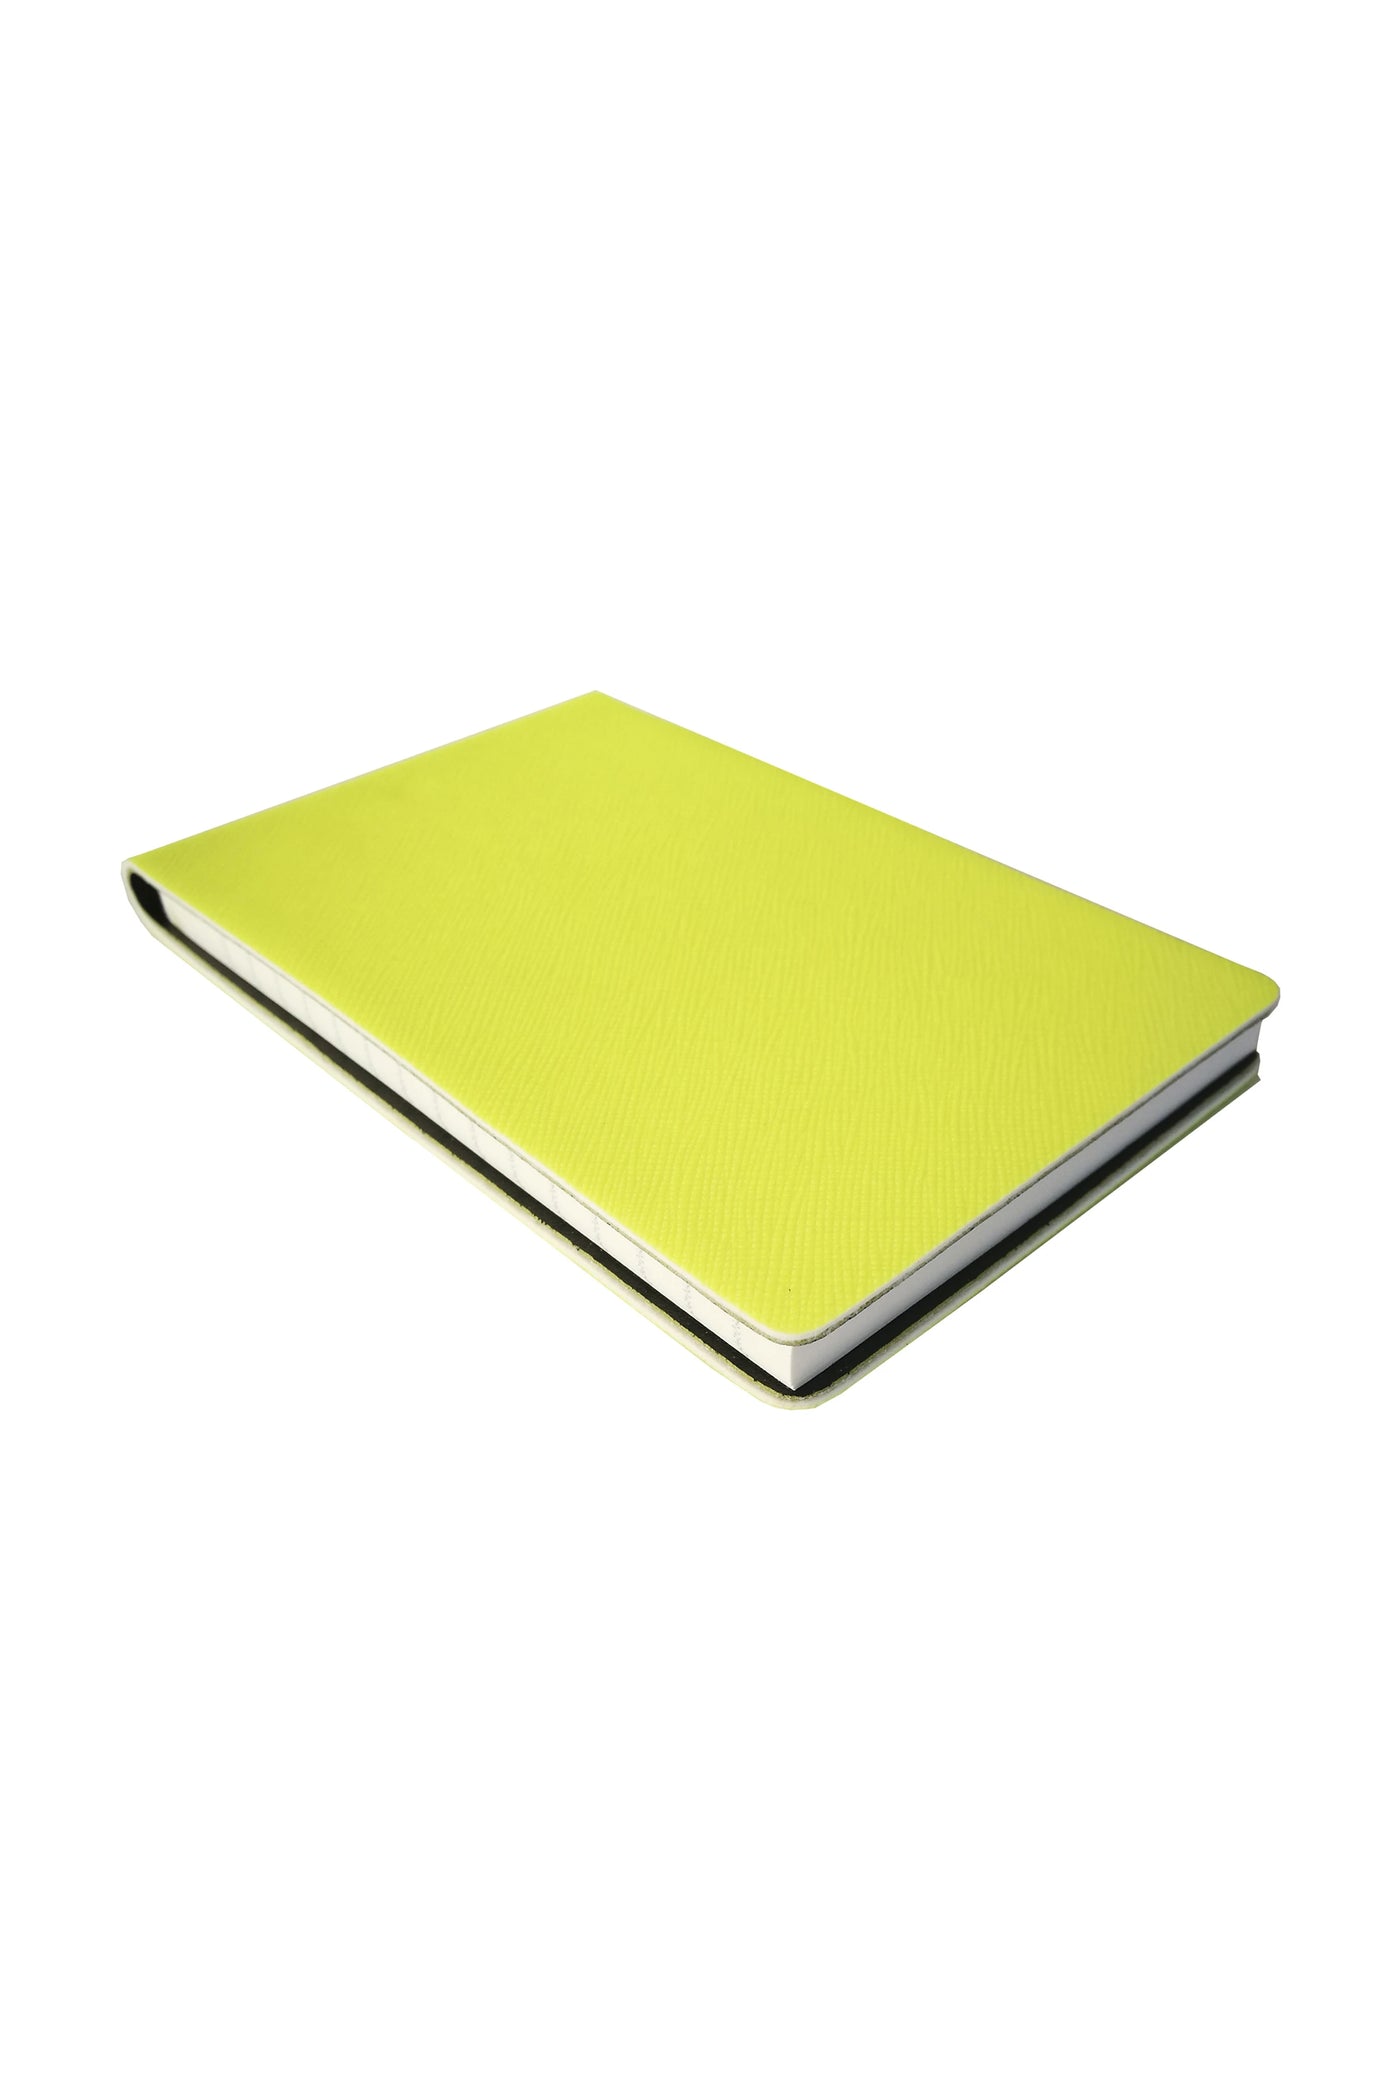 A6 Neon Textured Note Pad Lined